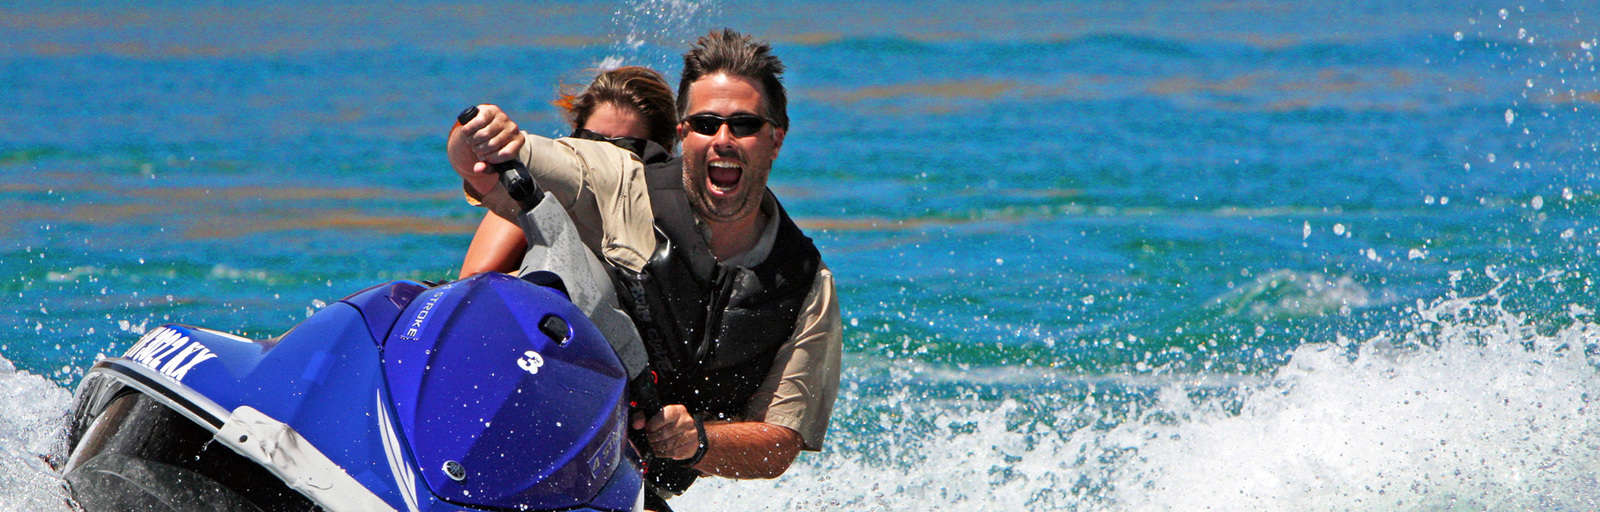 people on a jet ski in the water